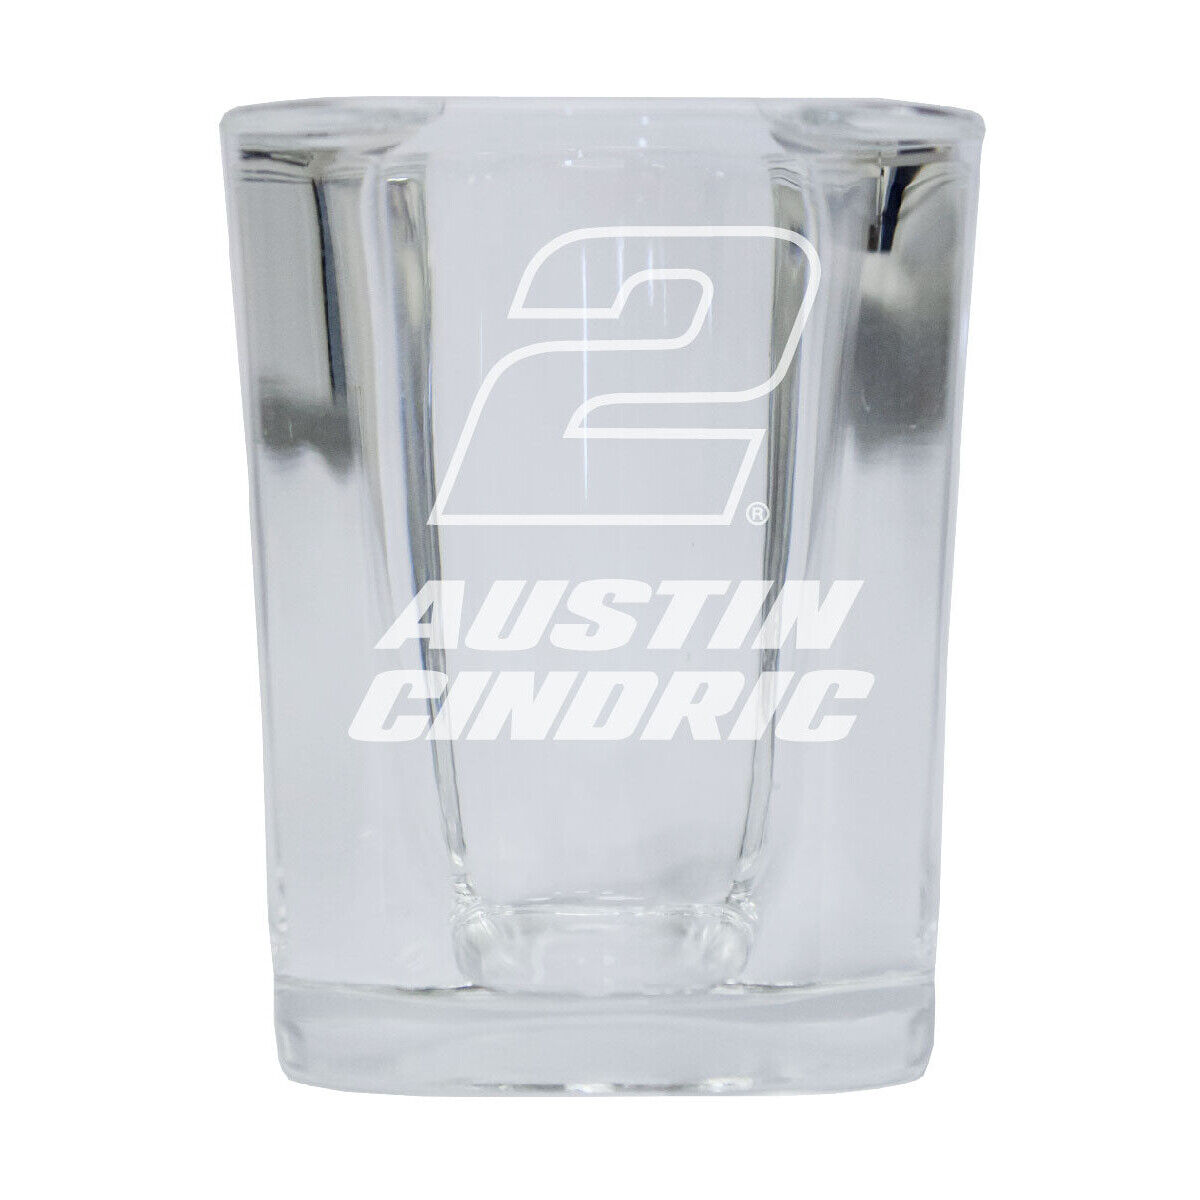 2 Austin Cindric Officially Licensed Square Shot Glass